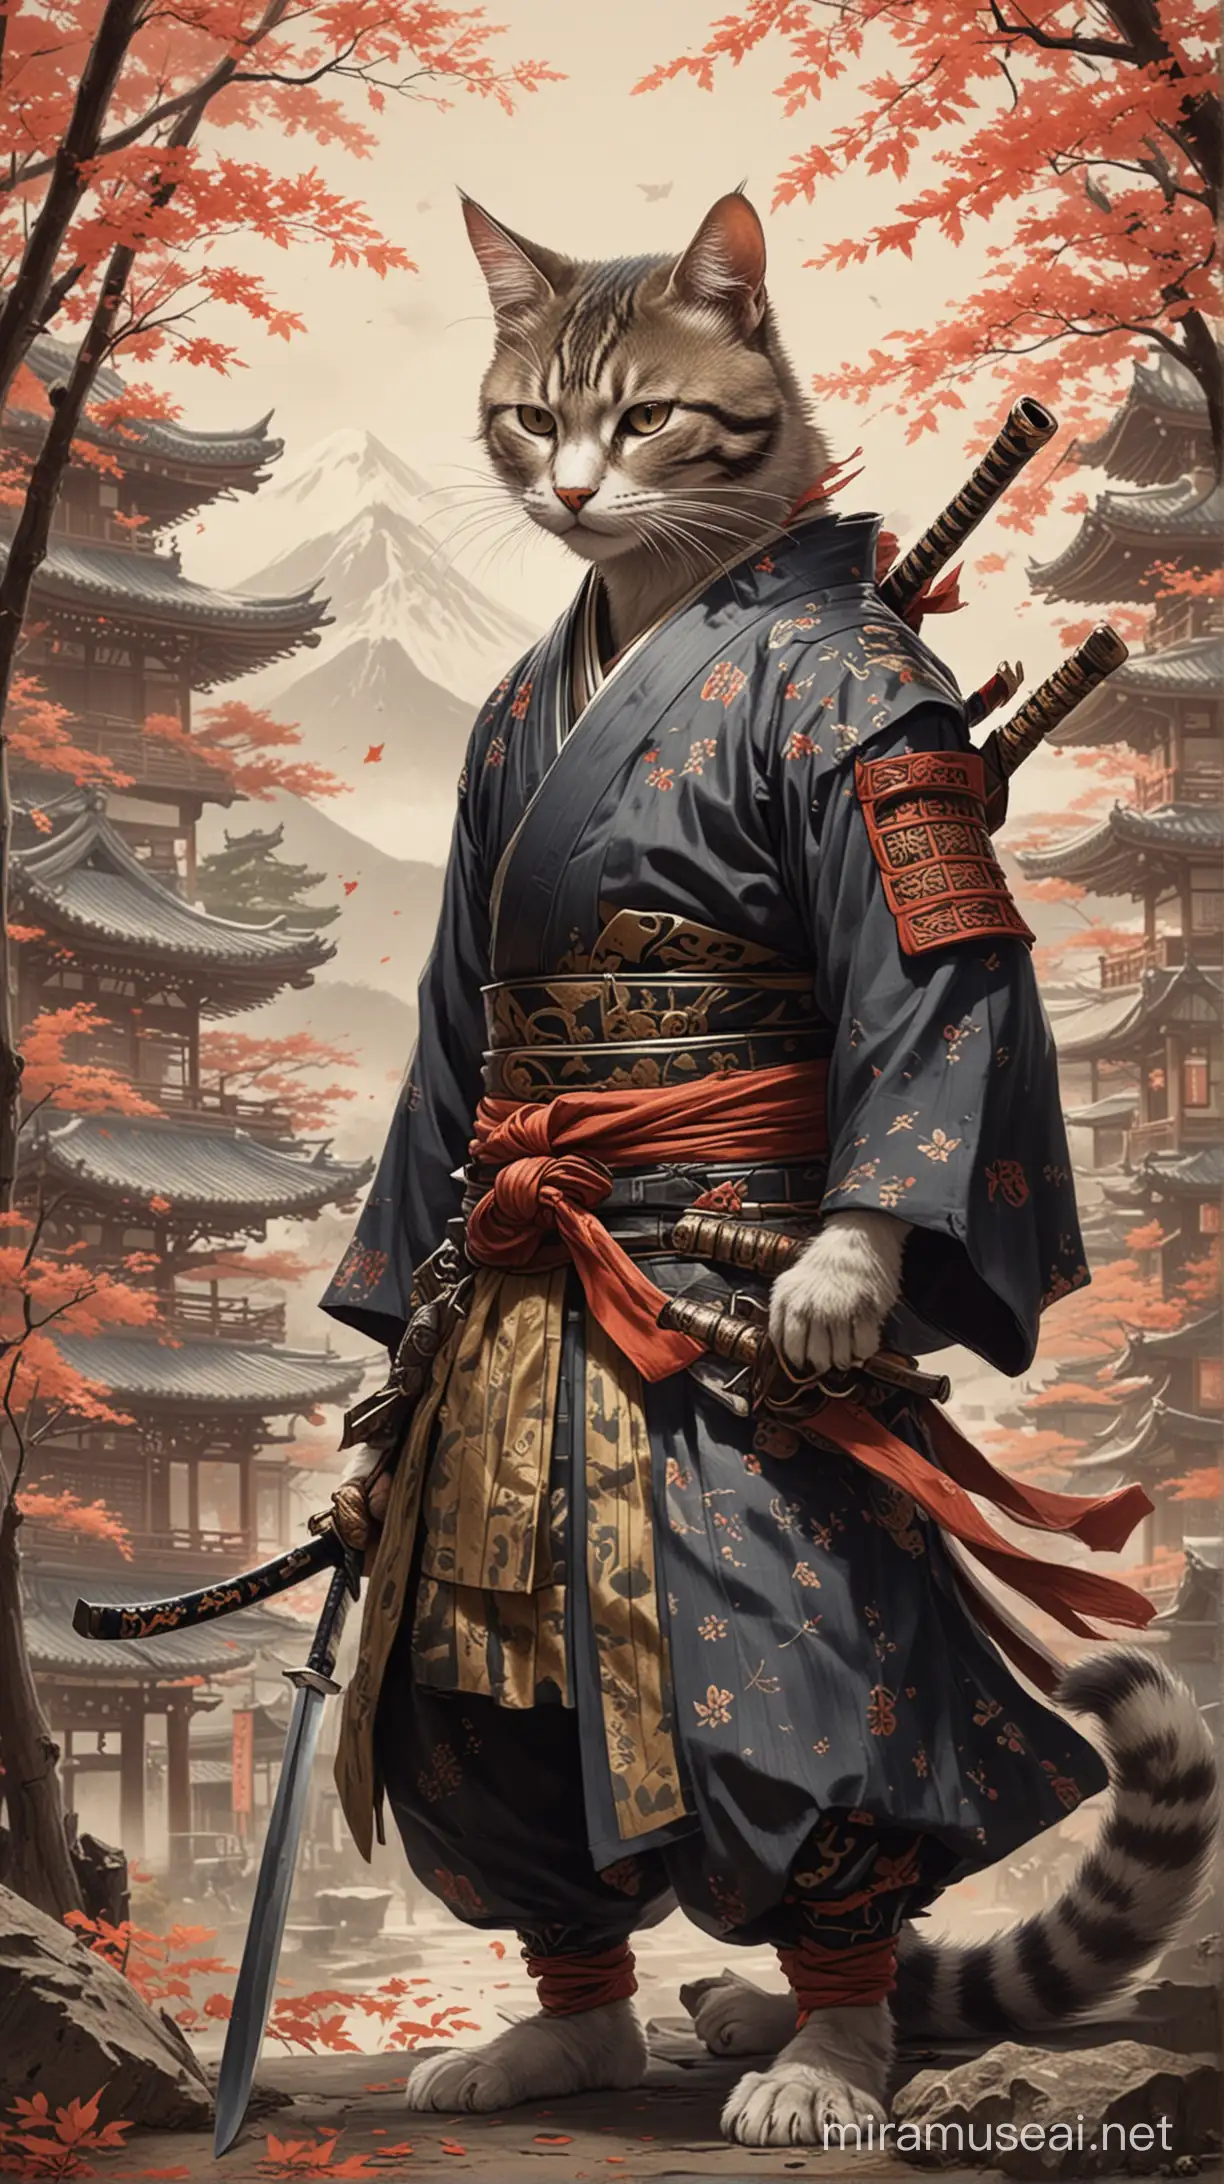 Stylized Samurai Cat with Medieval Japan Background